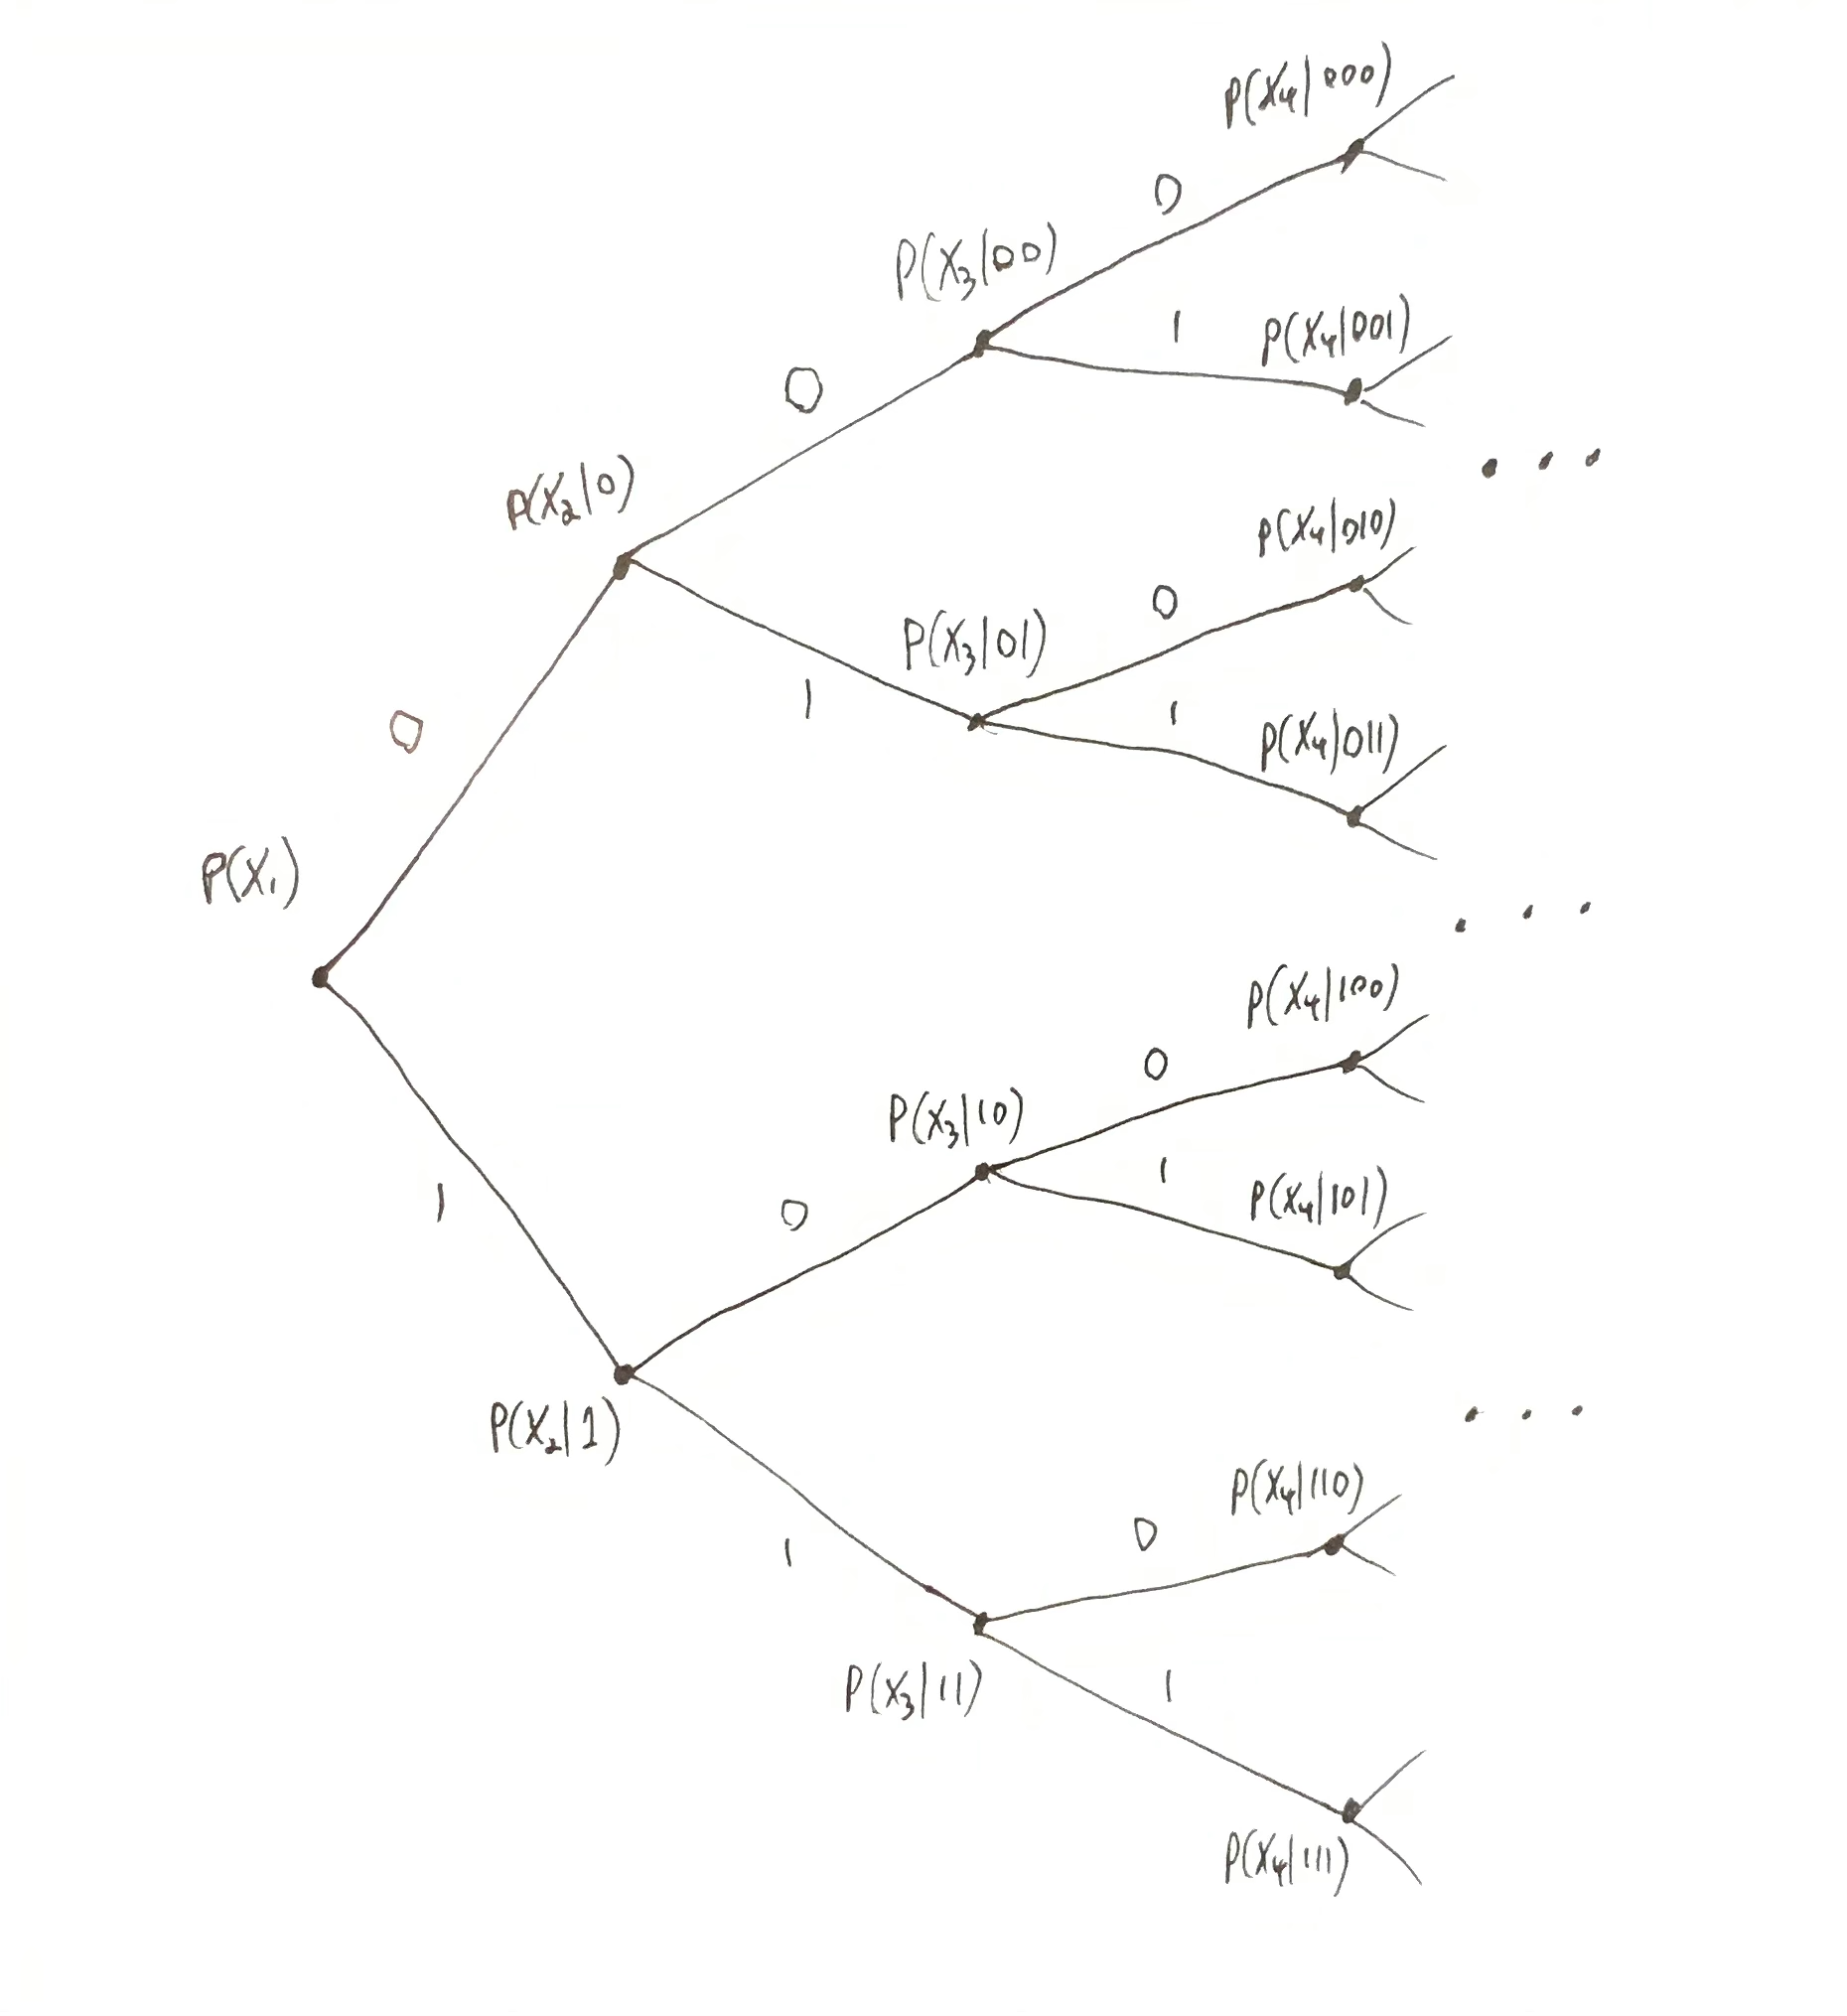 Each node in the tree is assigned a conditional probability distribution, i.e. for each node at position $x_{&lt;n}$ (where $x_{&lt;n} = (x_1, x_2,\dots,x_{n-1})$ encodes a path from the root), the probability $p(\chi \mid \dots)$ is specified for each $\chi\in\X$.